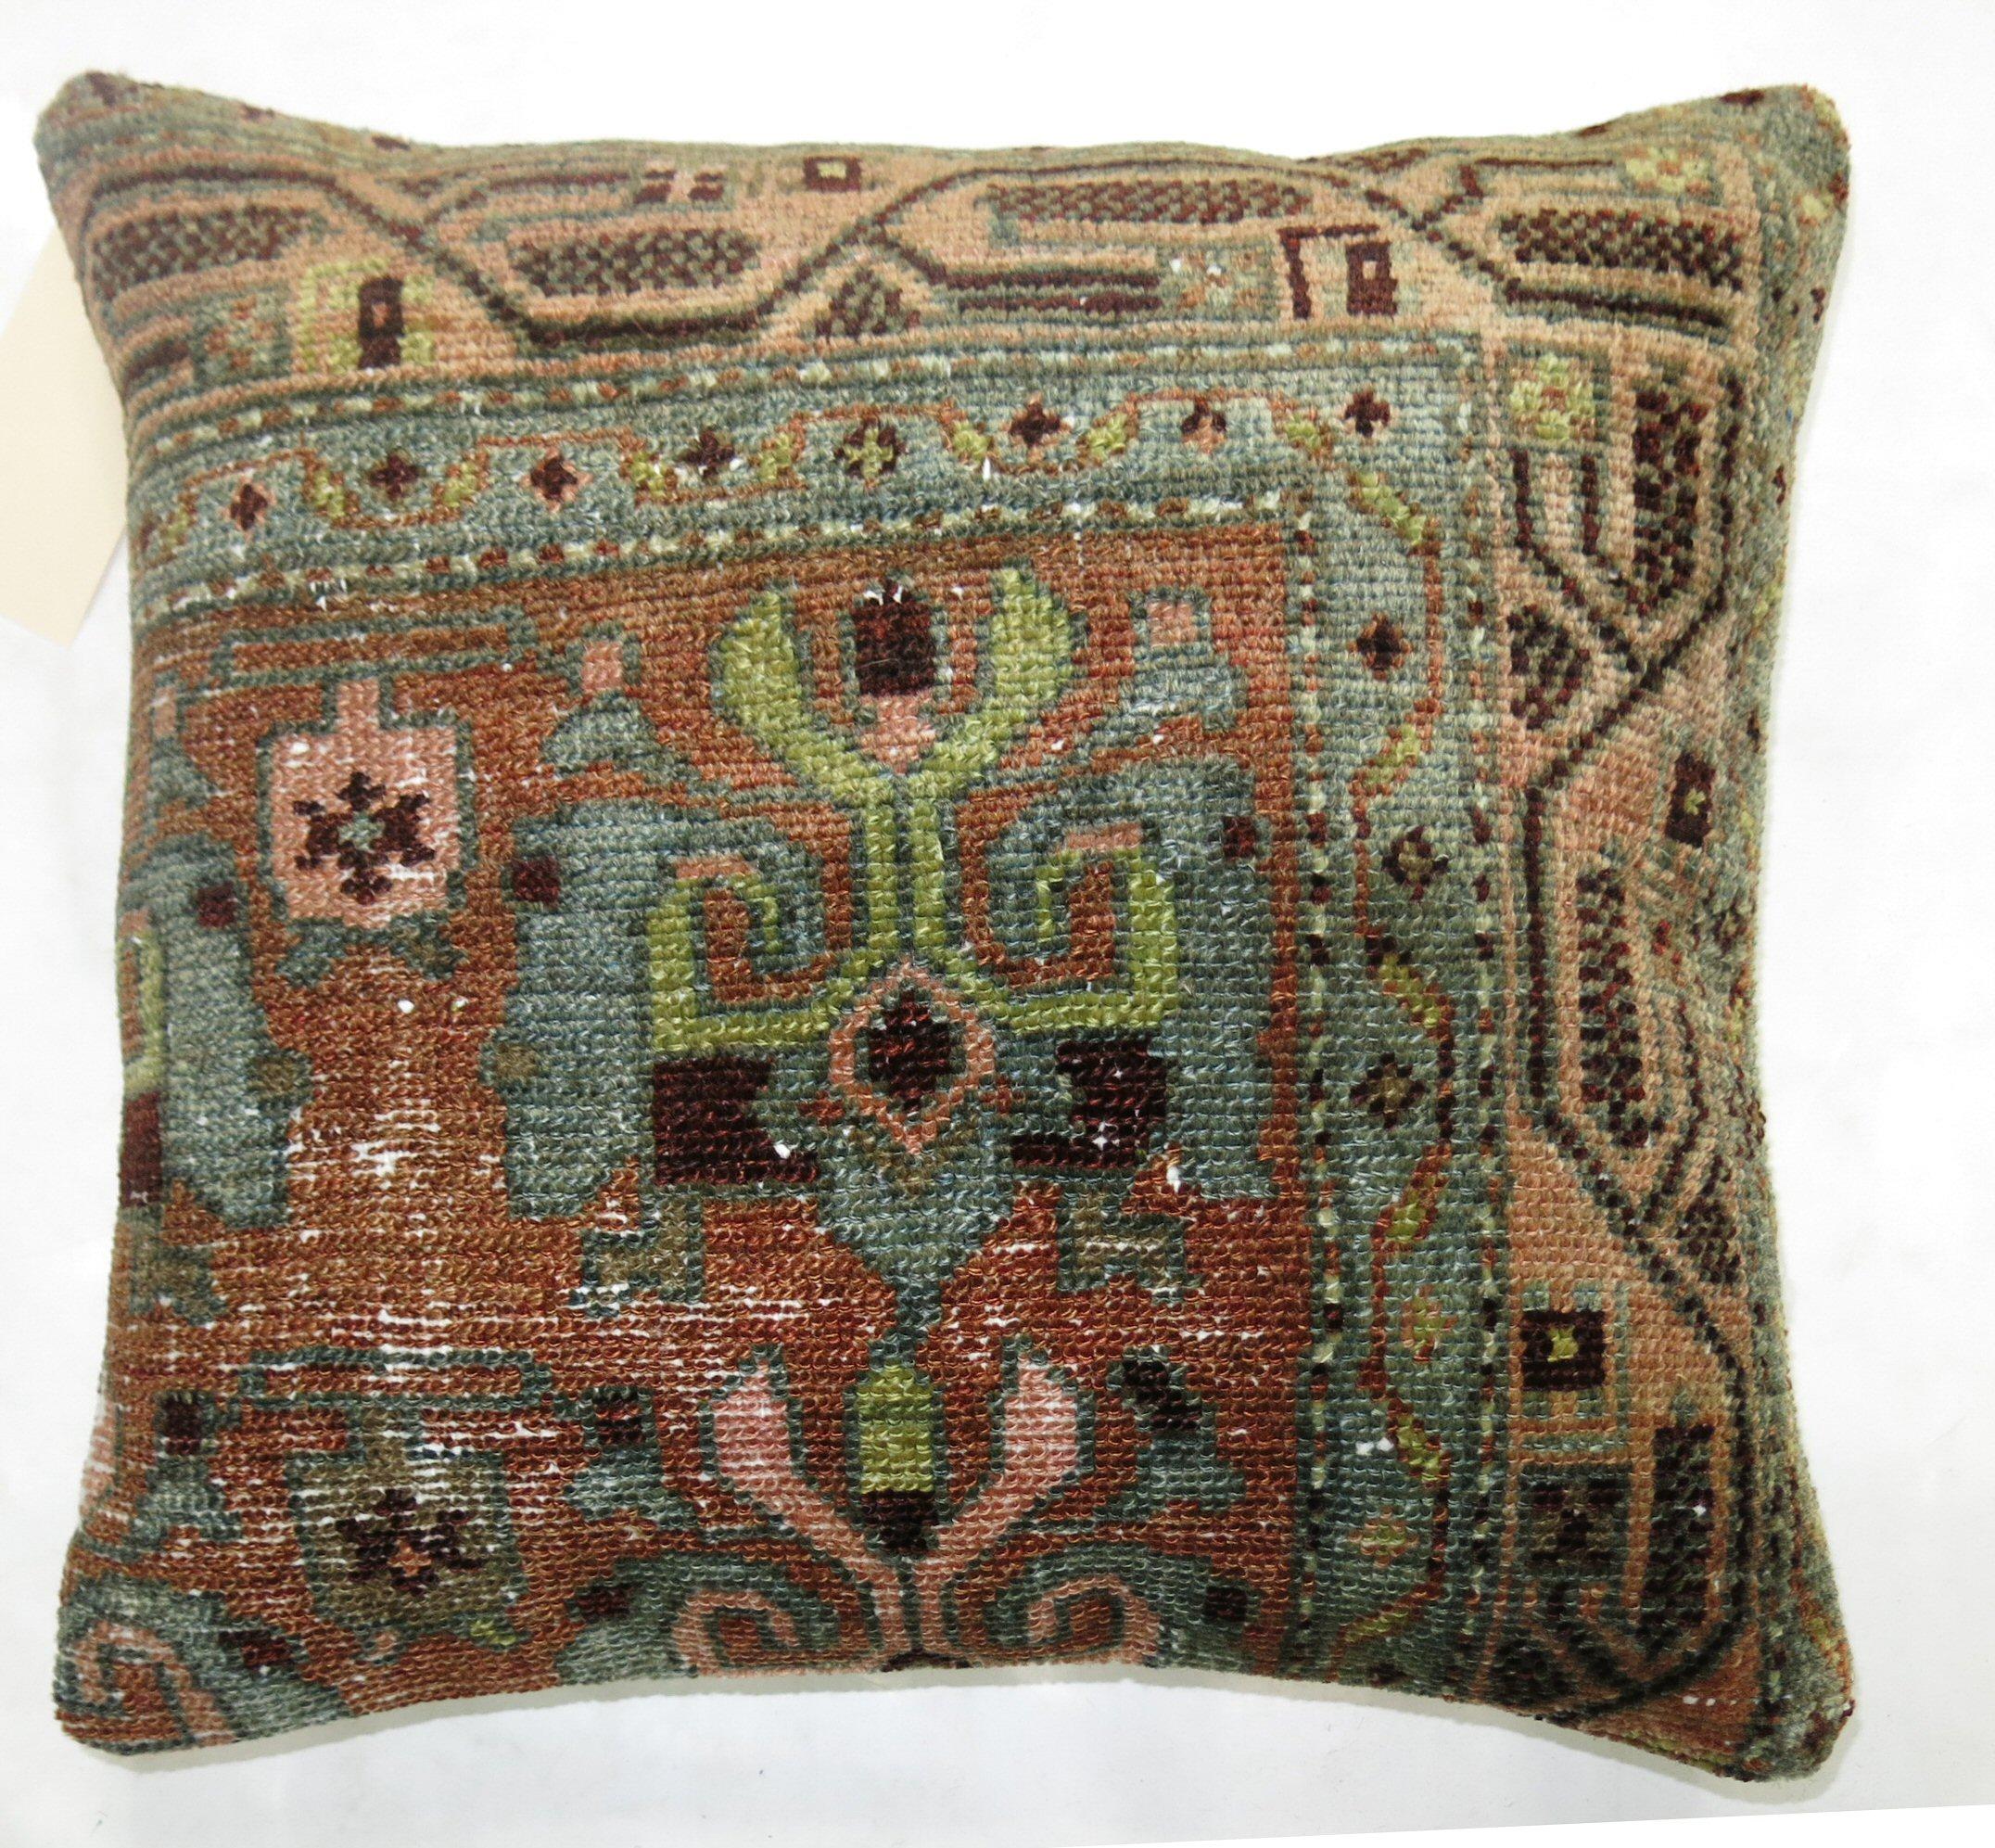 Pillow made from an antique  Persian Malayer rug.

Measures: 16'' x 18''.